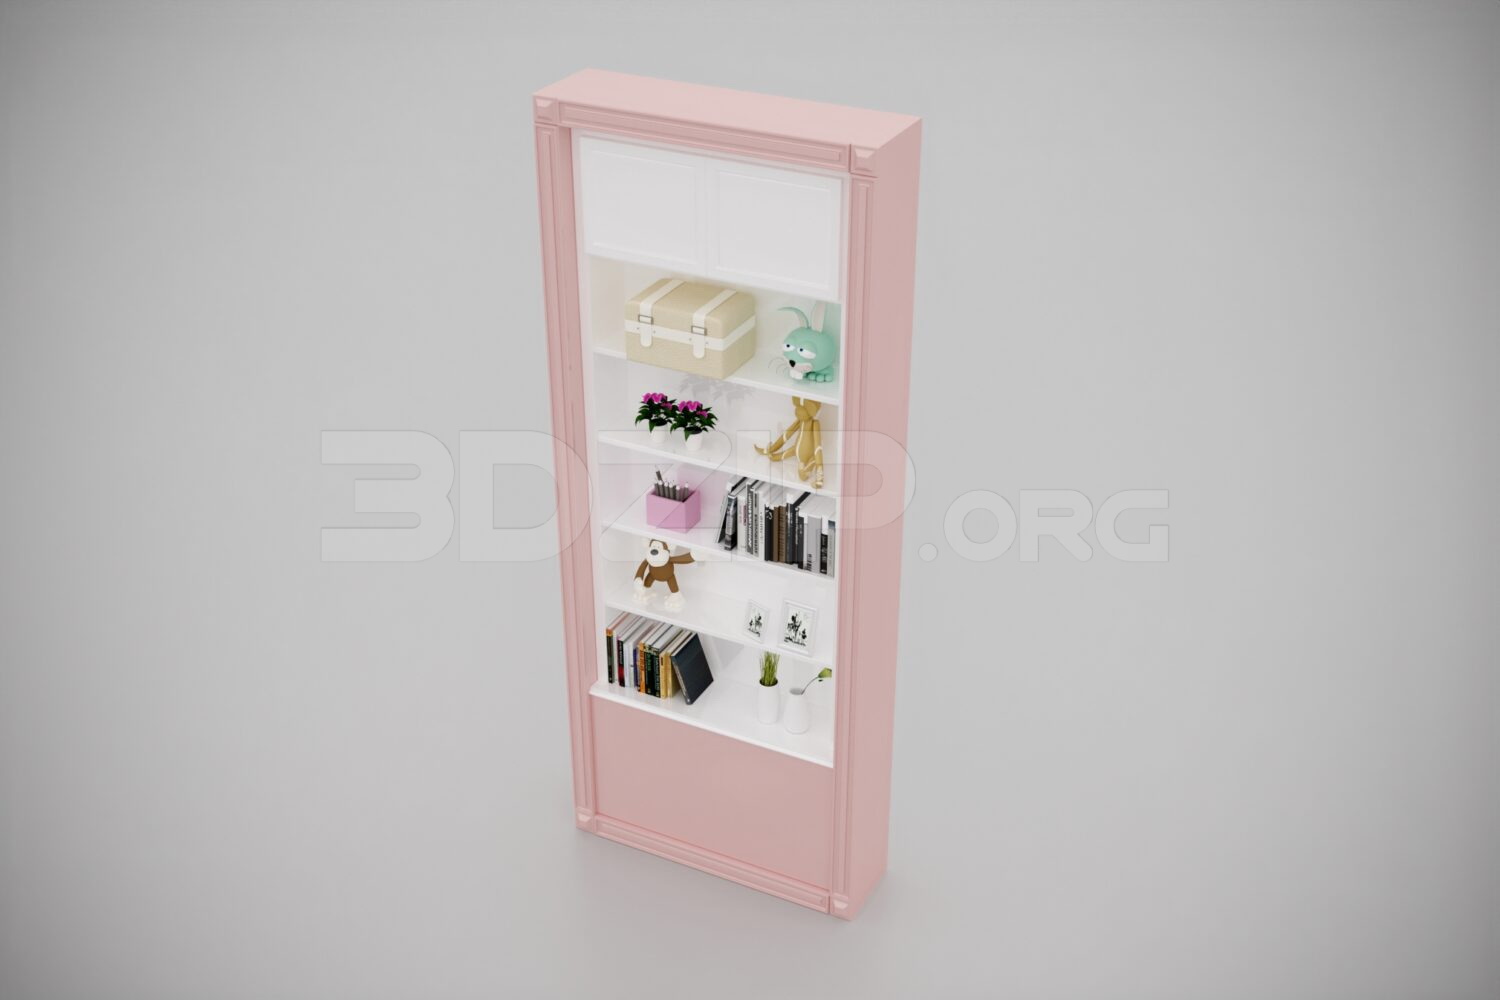 2250. Free 3D Display Cabinets Model Download